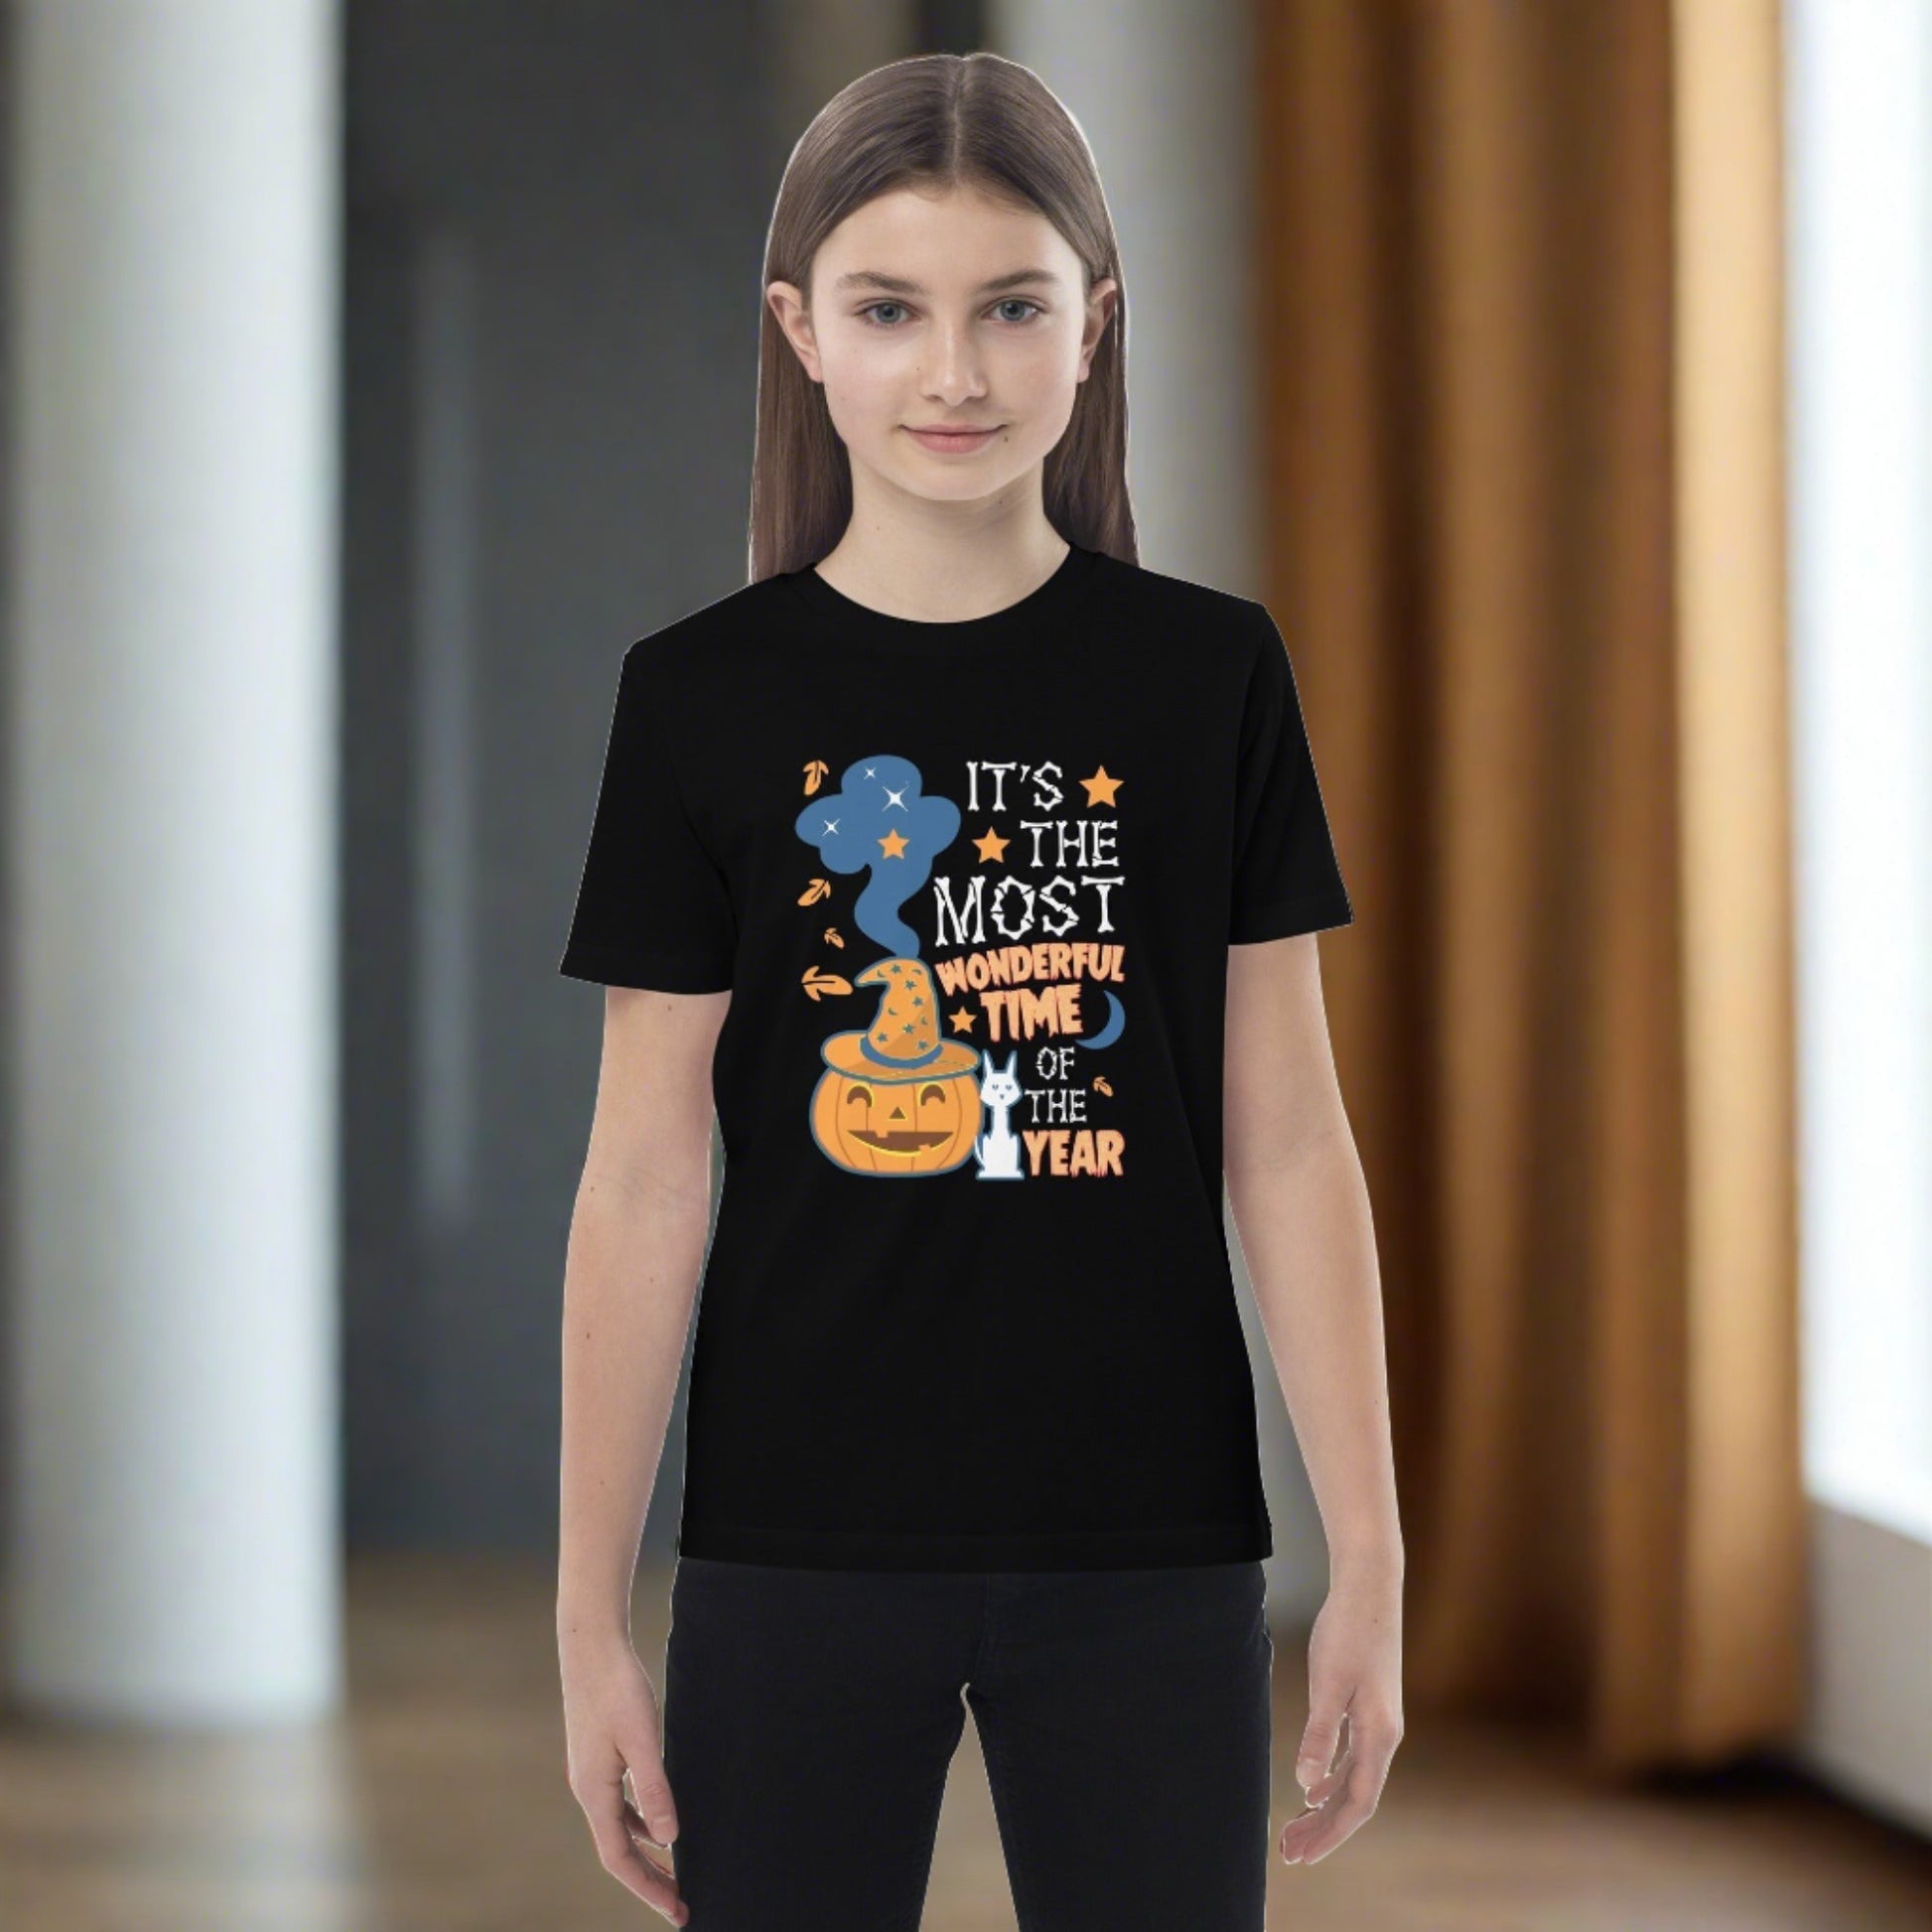 It's the most wonderful time of the year youth t-shirt